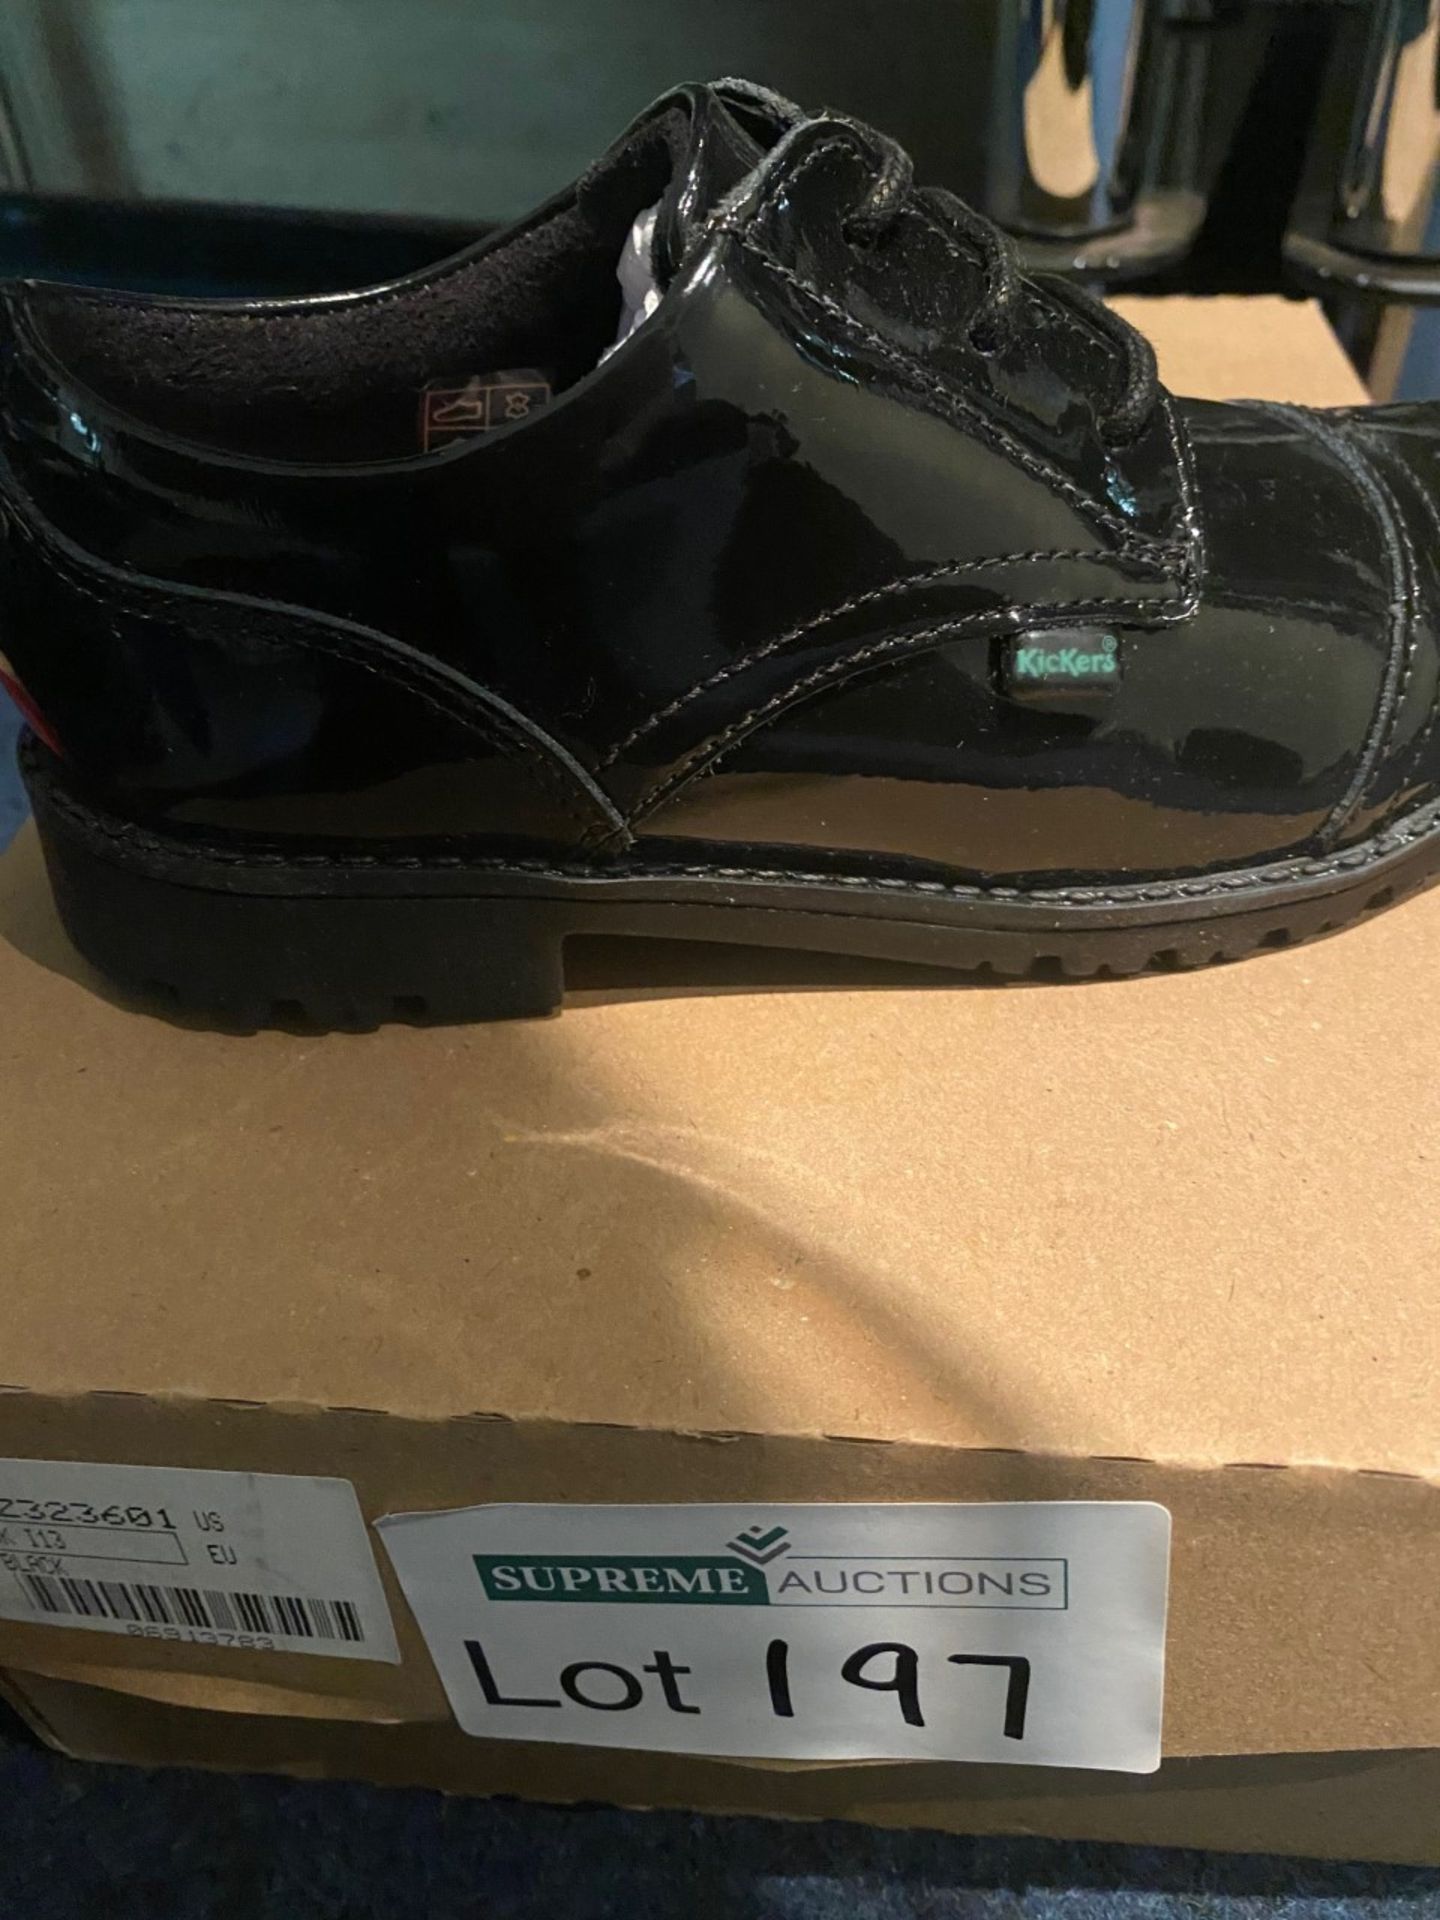 NEW & BOXED KICKERS BLACK SHOE SIZE INFANT 13 (197/21) - Image 2 of 2